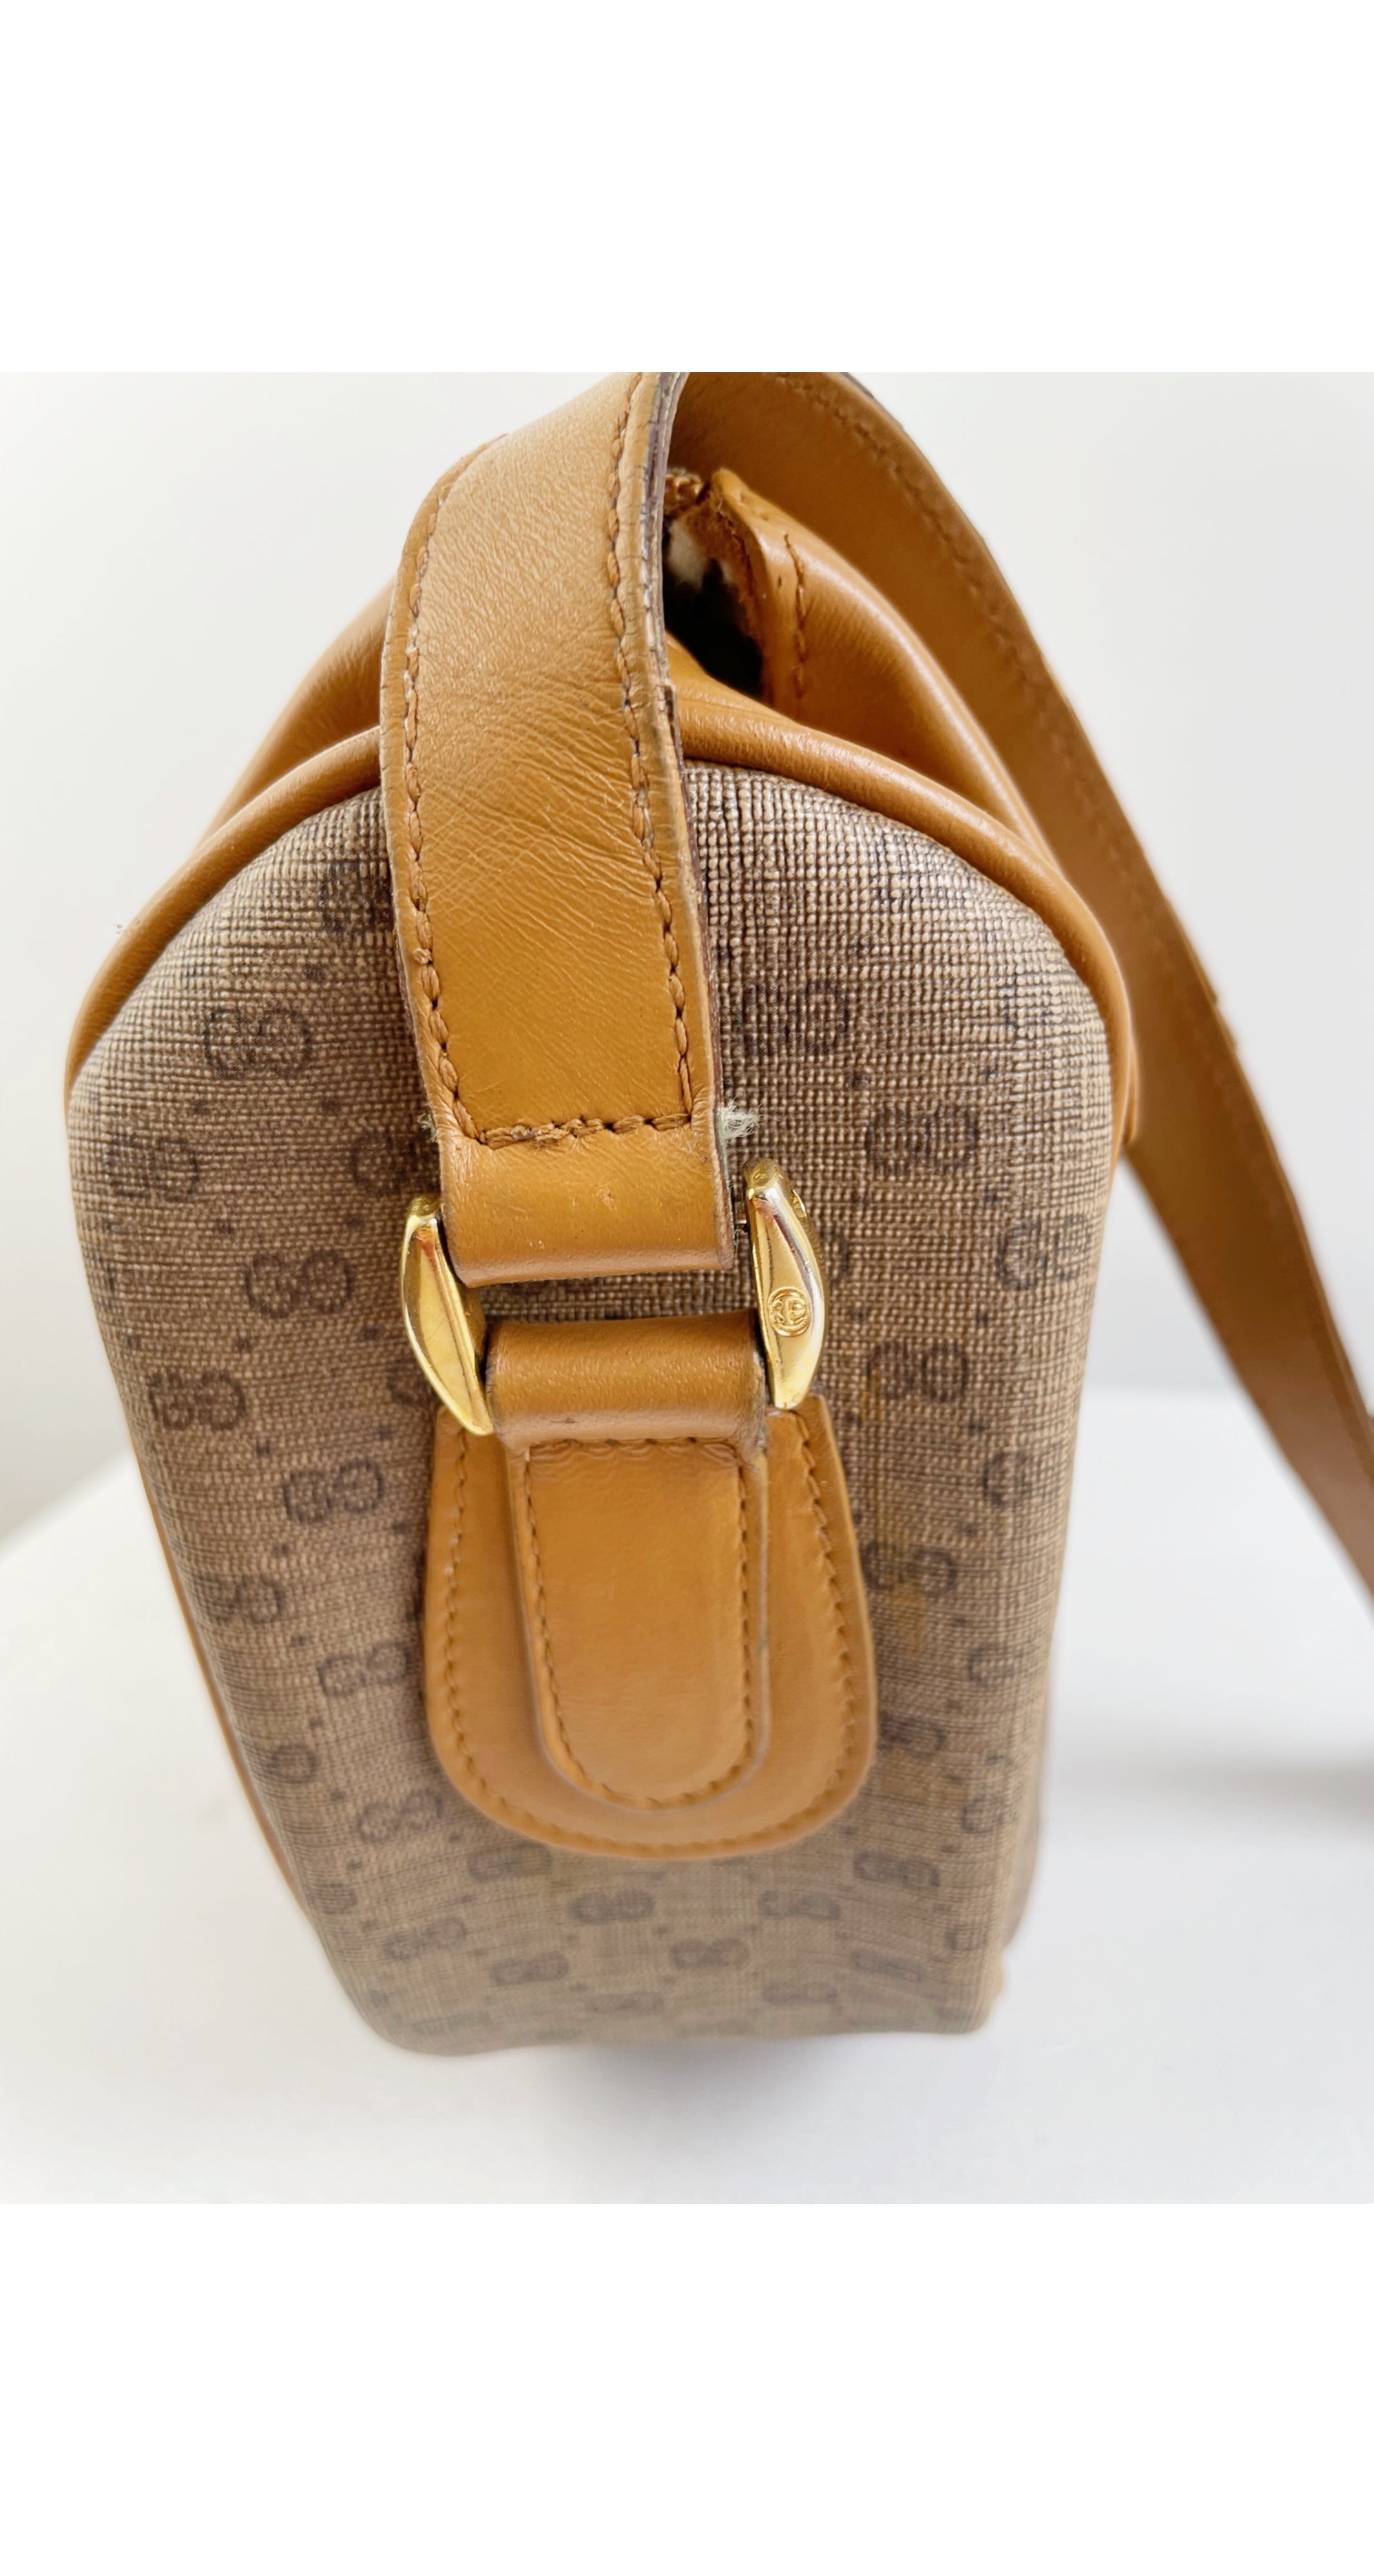 1980s Gucci Coated Canvas and Leather GG Monogram Crossbody at 1stDibs